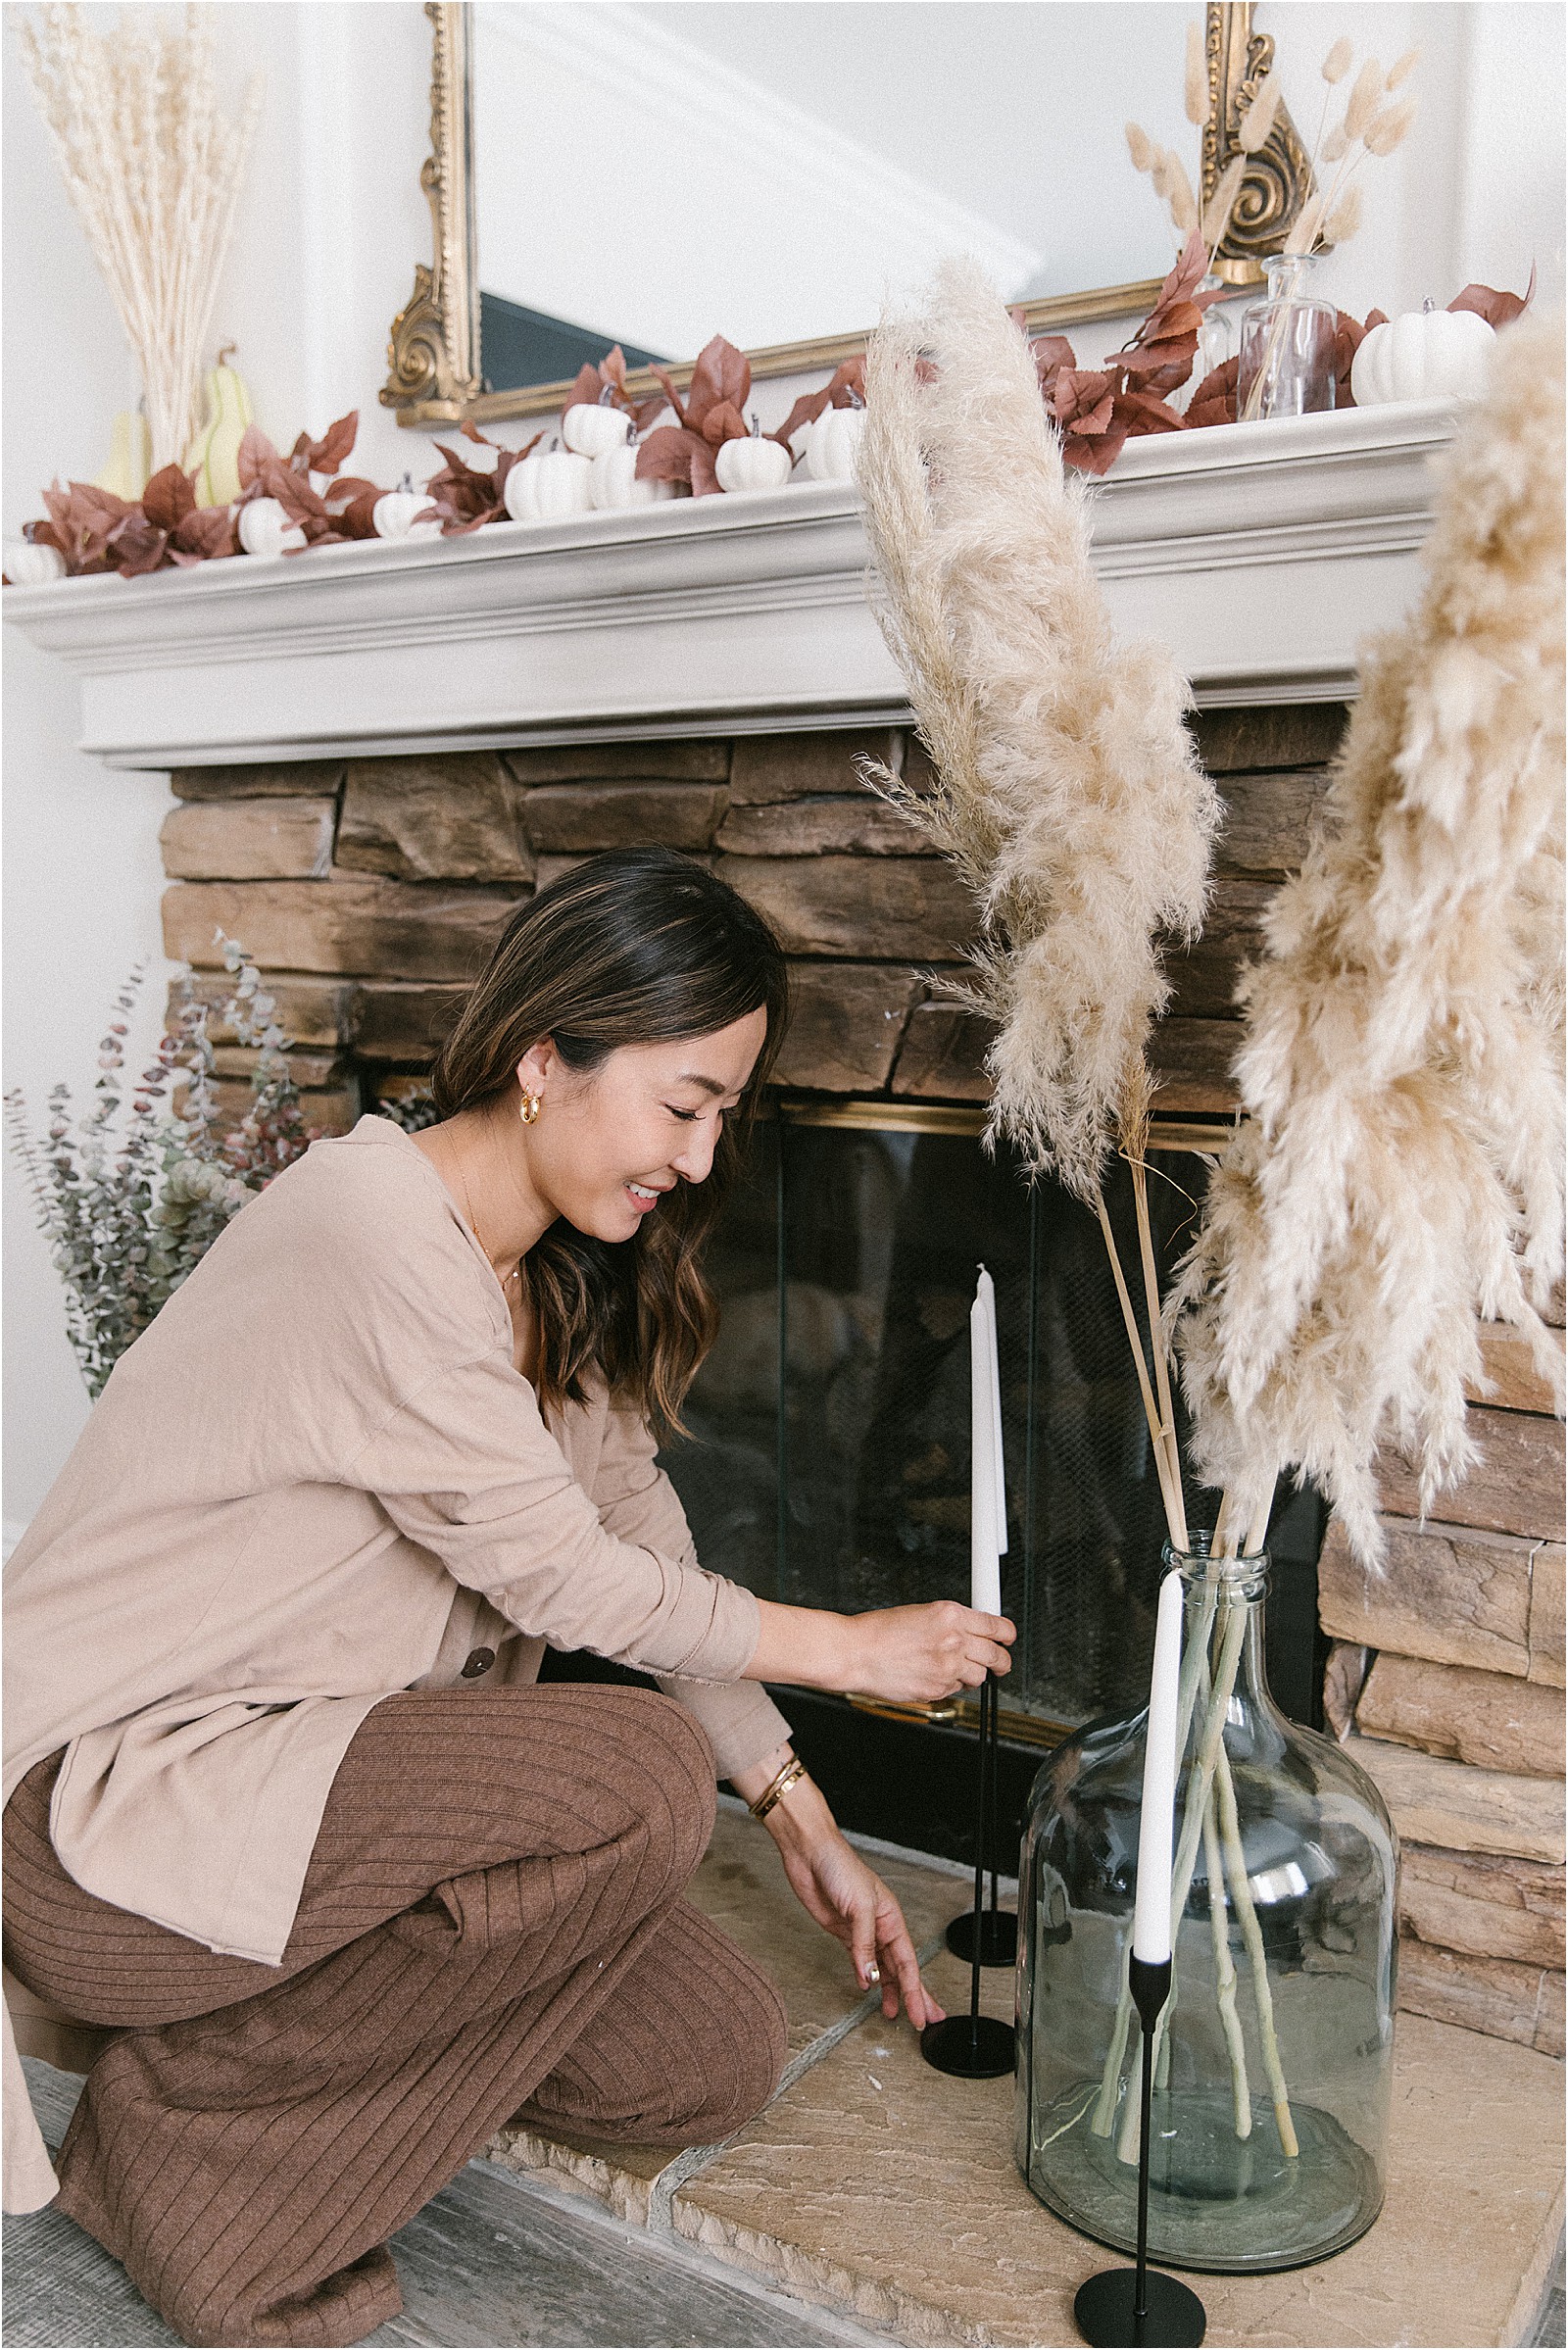 How To Decorate Your Mantle For Fall